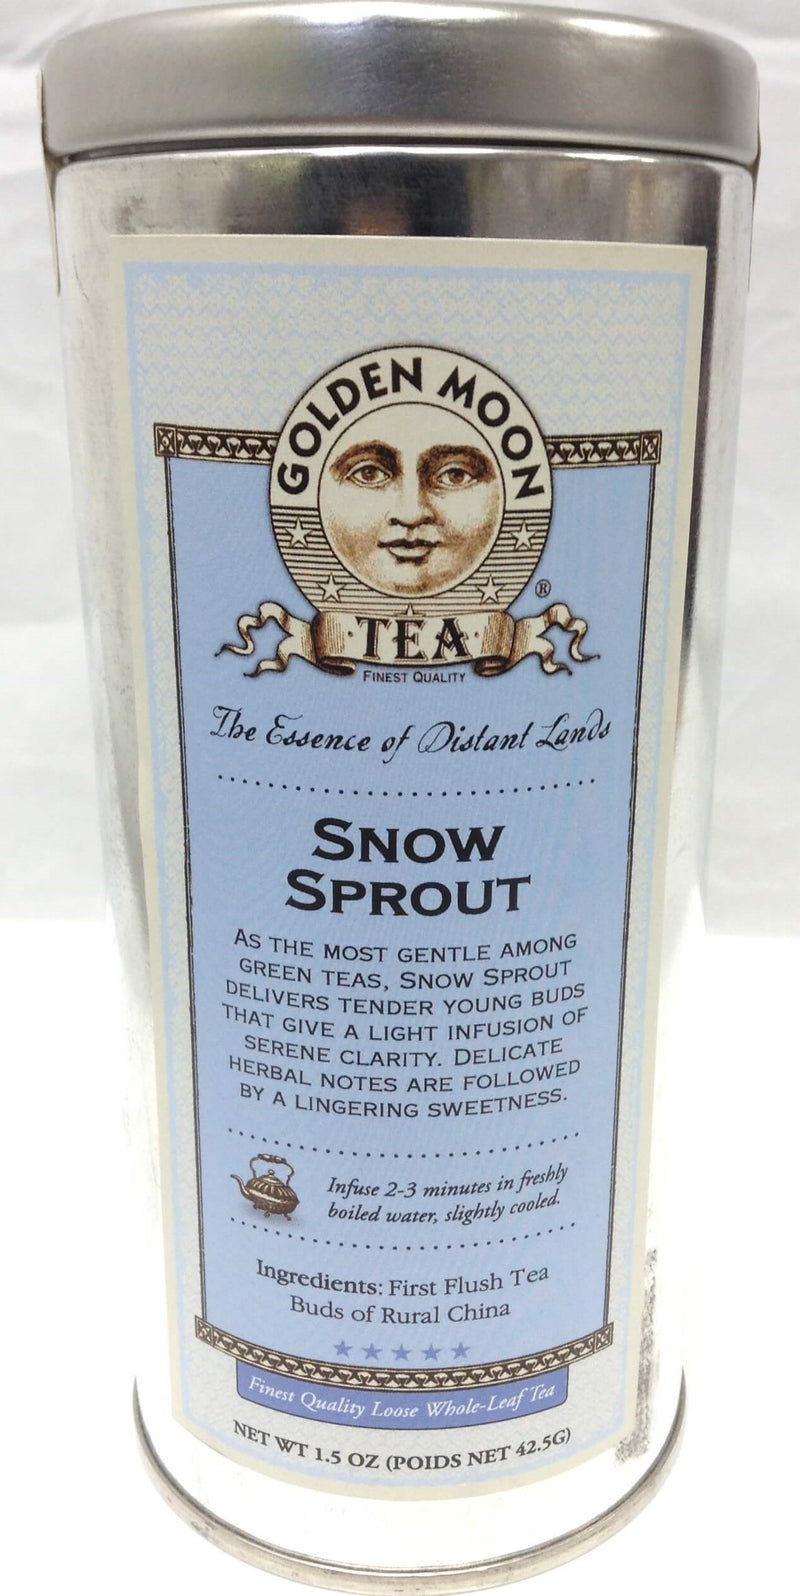 Snow Sprout